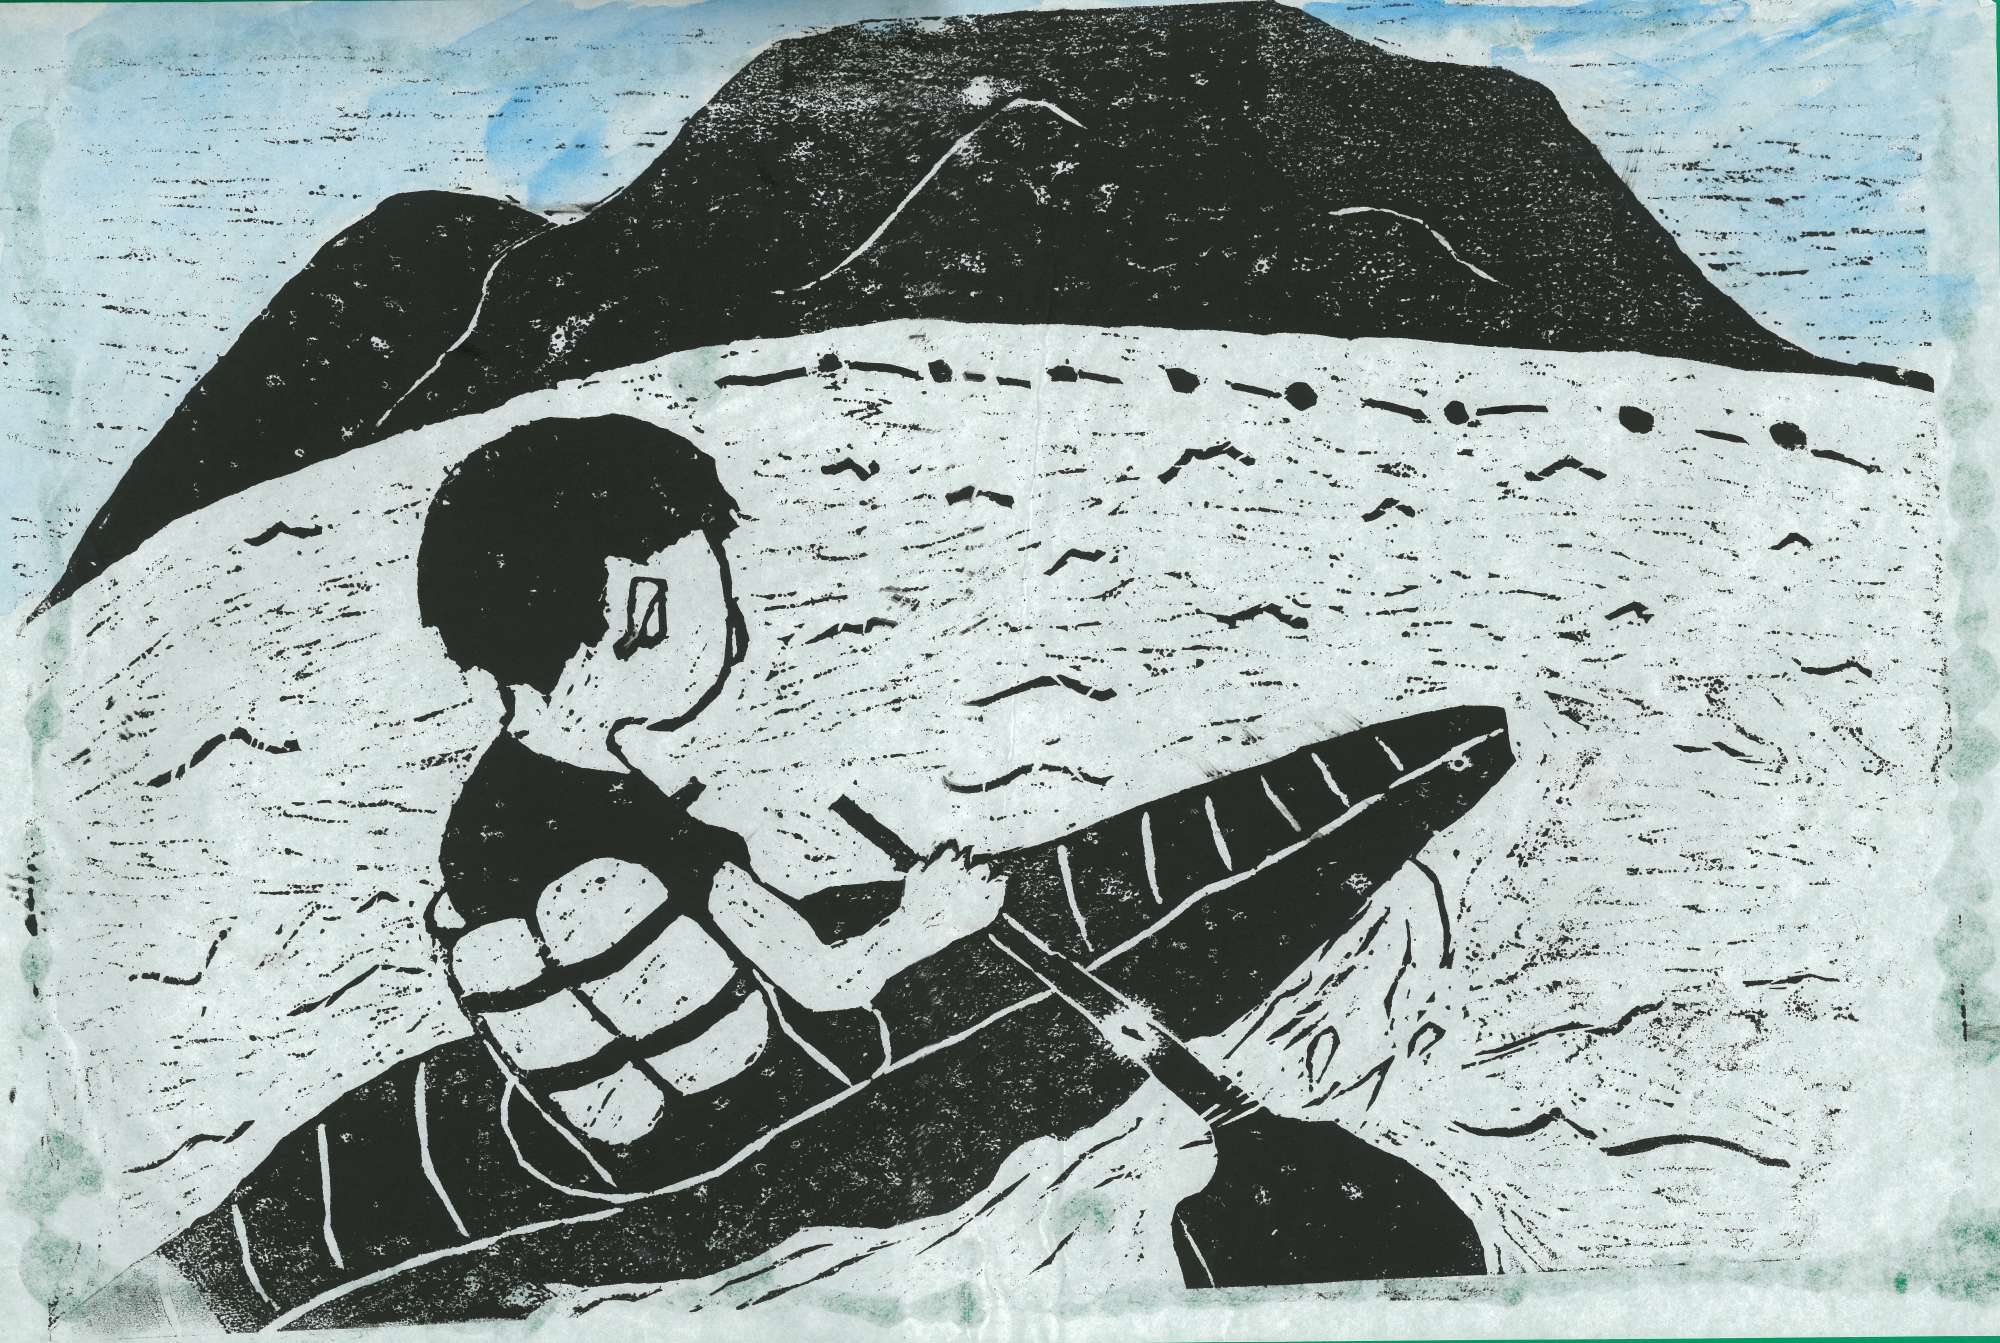 Nagoya Art Exchange 2021 - Japan - I wanted to ride a canoe during the summer vacation